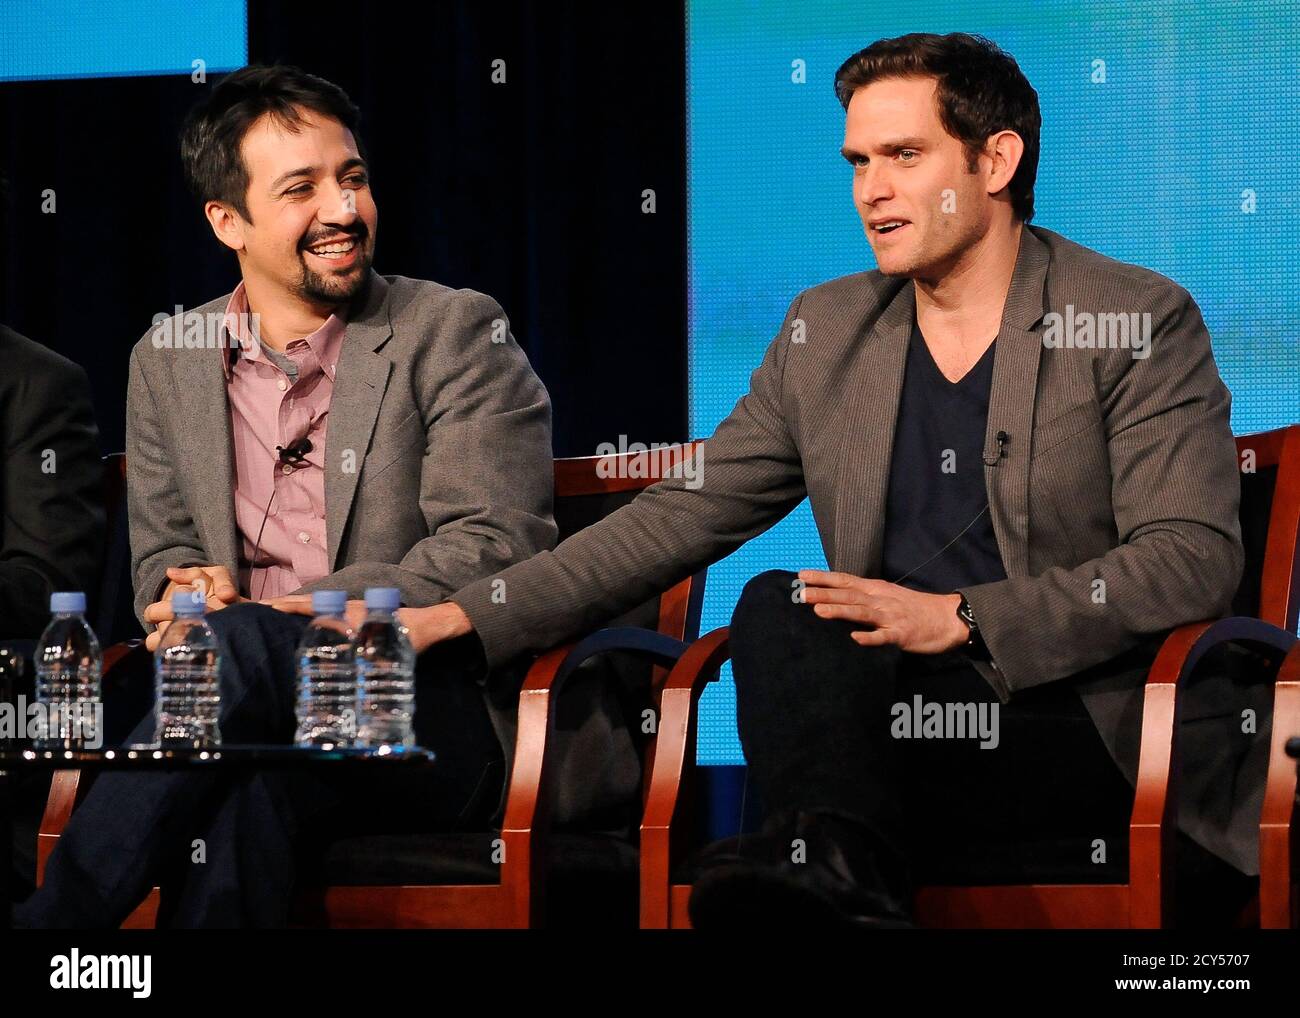 Actors Lin-Manuel Miranda (L) and Steven Pasquale (R) take part in a panel discussion of NBC Universal's series 'Do No Harm' during the 2013 Winter Press Tour for the Television Critics Association in Pasadena, California January 6, 2013. REUTERS/Gus Ruelas (UNITED STATES - Tags: ENTERTAINMENT) Stock Photo